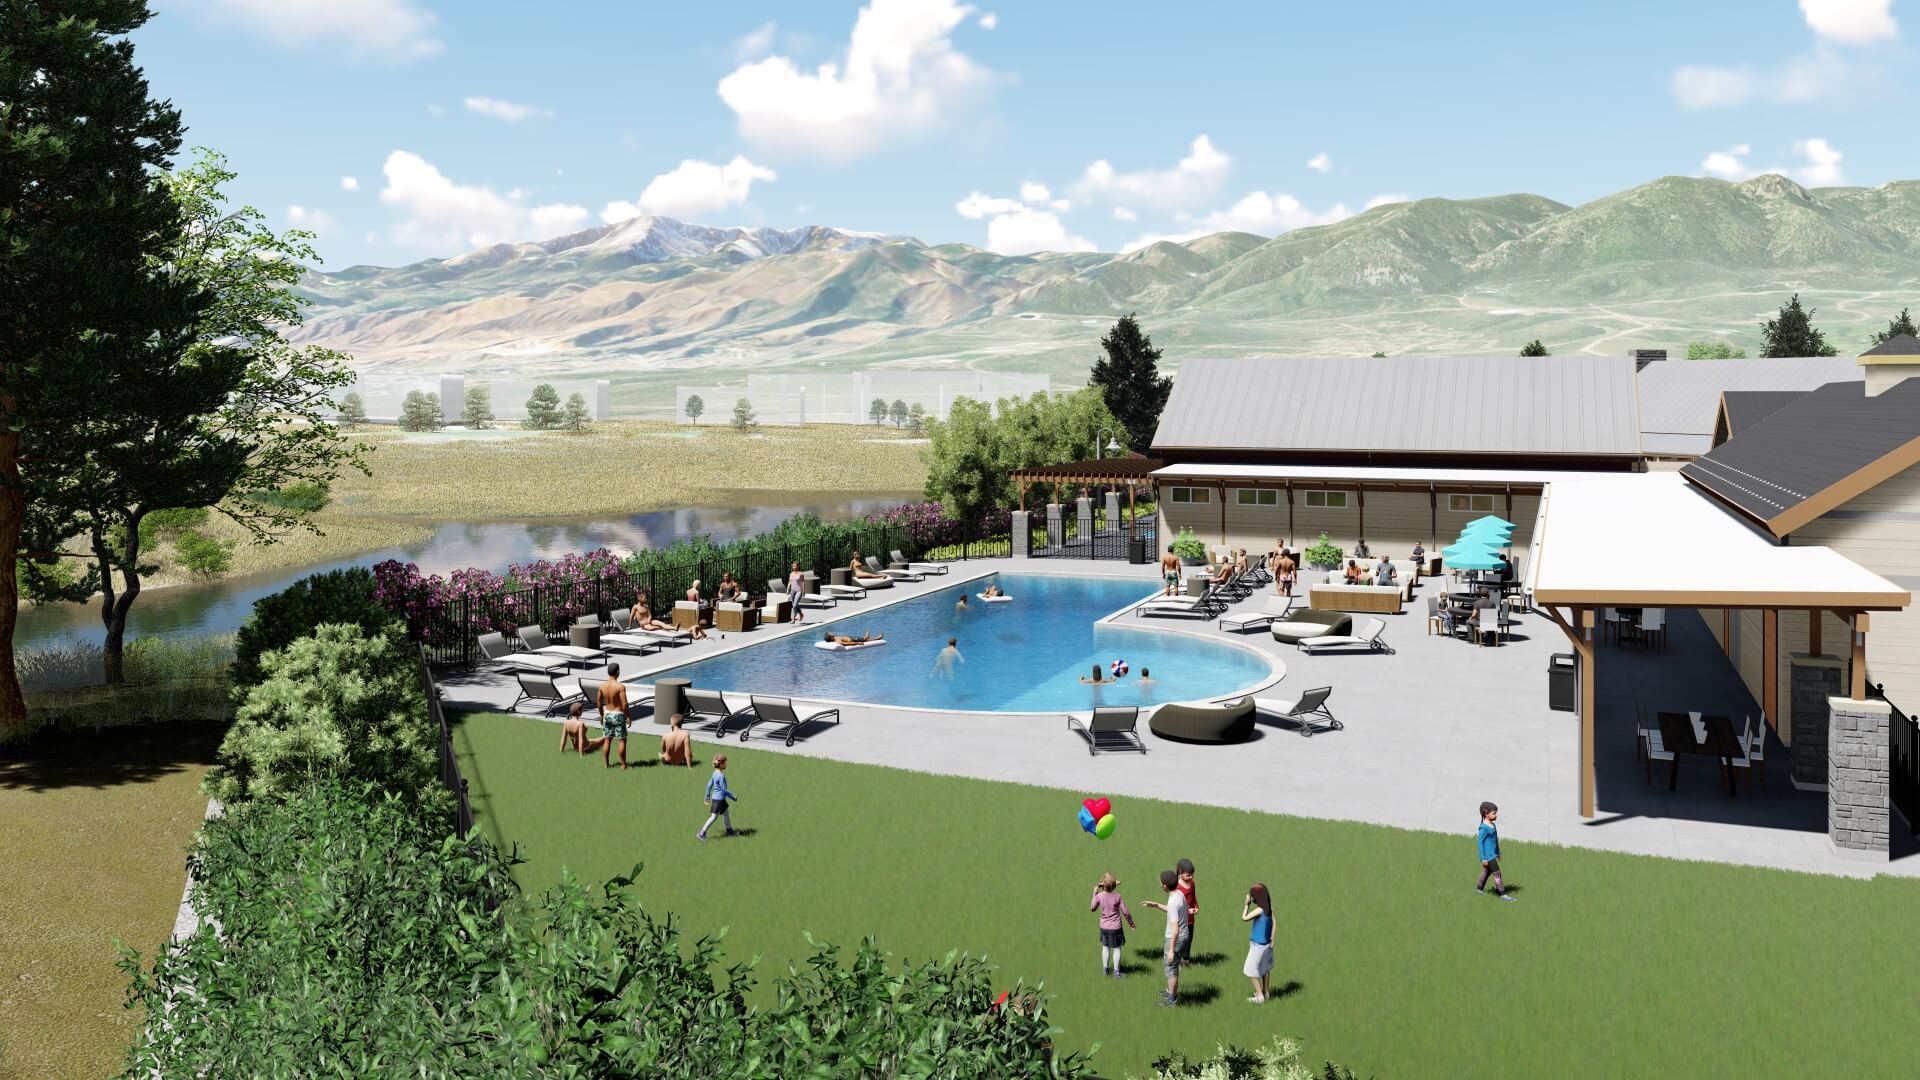 Overview of the Gathering Place pool